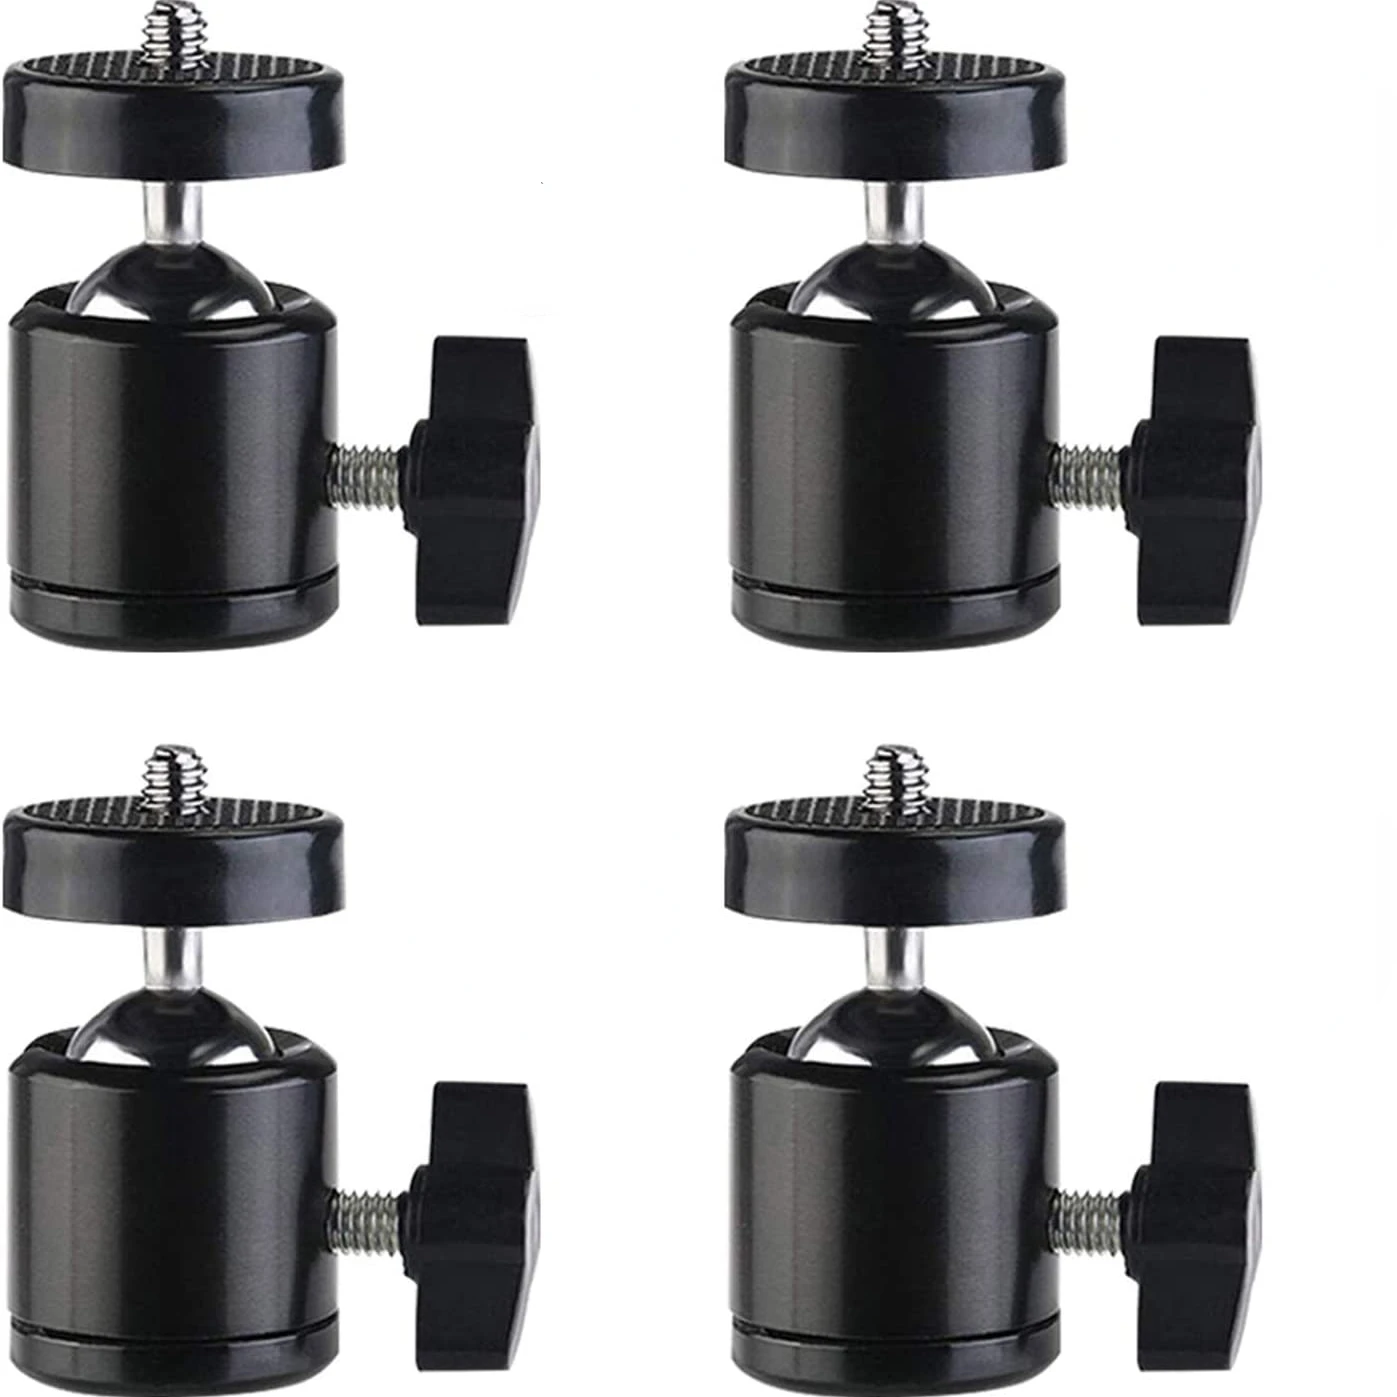 Hot Shoe Mount Adapter 360 Degree Swivel Mini Ball Head 1/4 Tripod Screw Head for Cameras Camcorders LED Video Light, Microphone